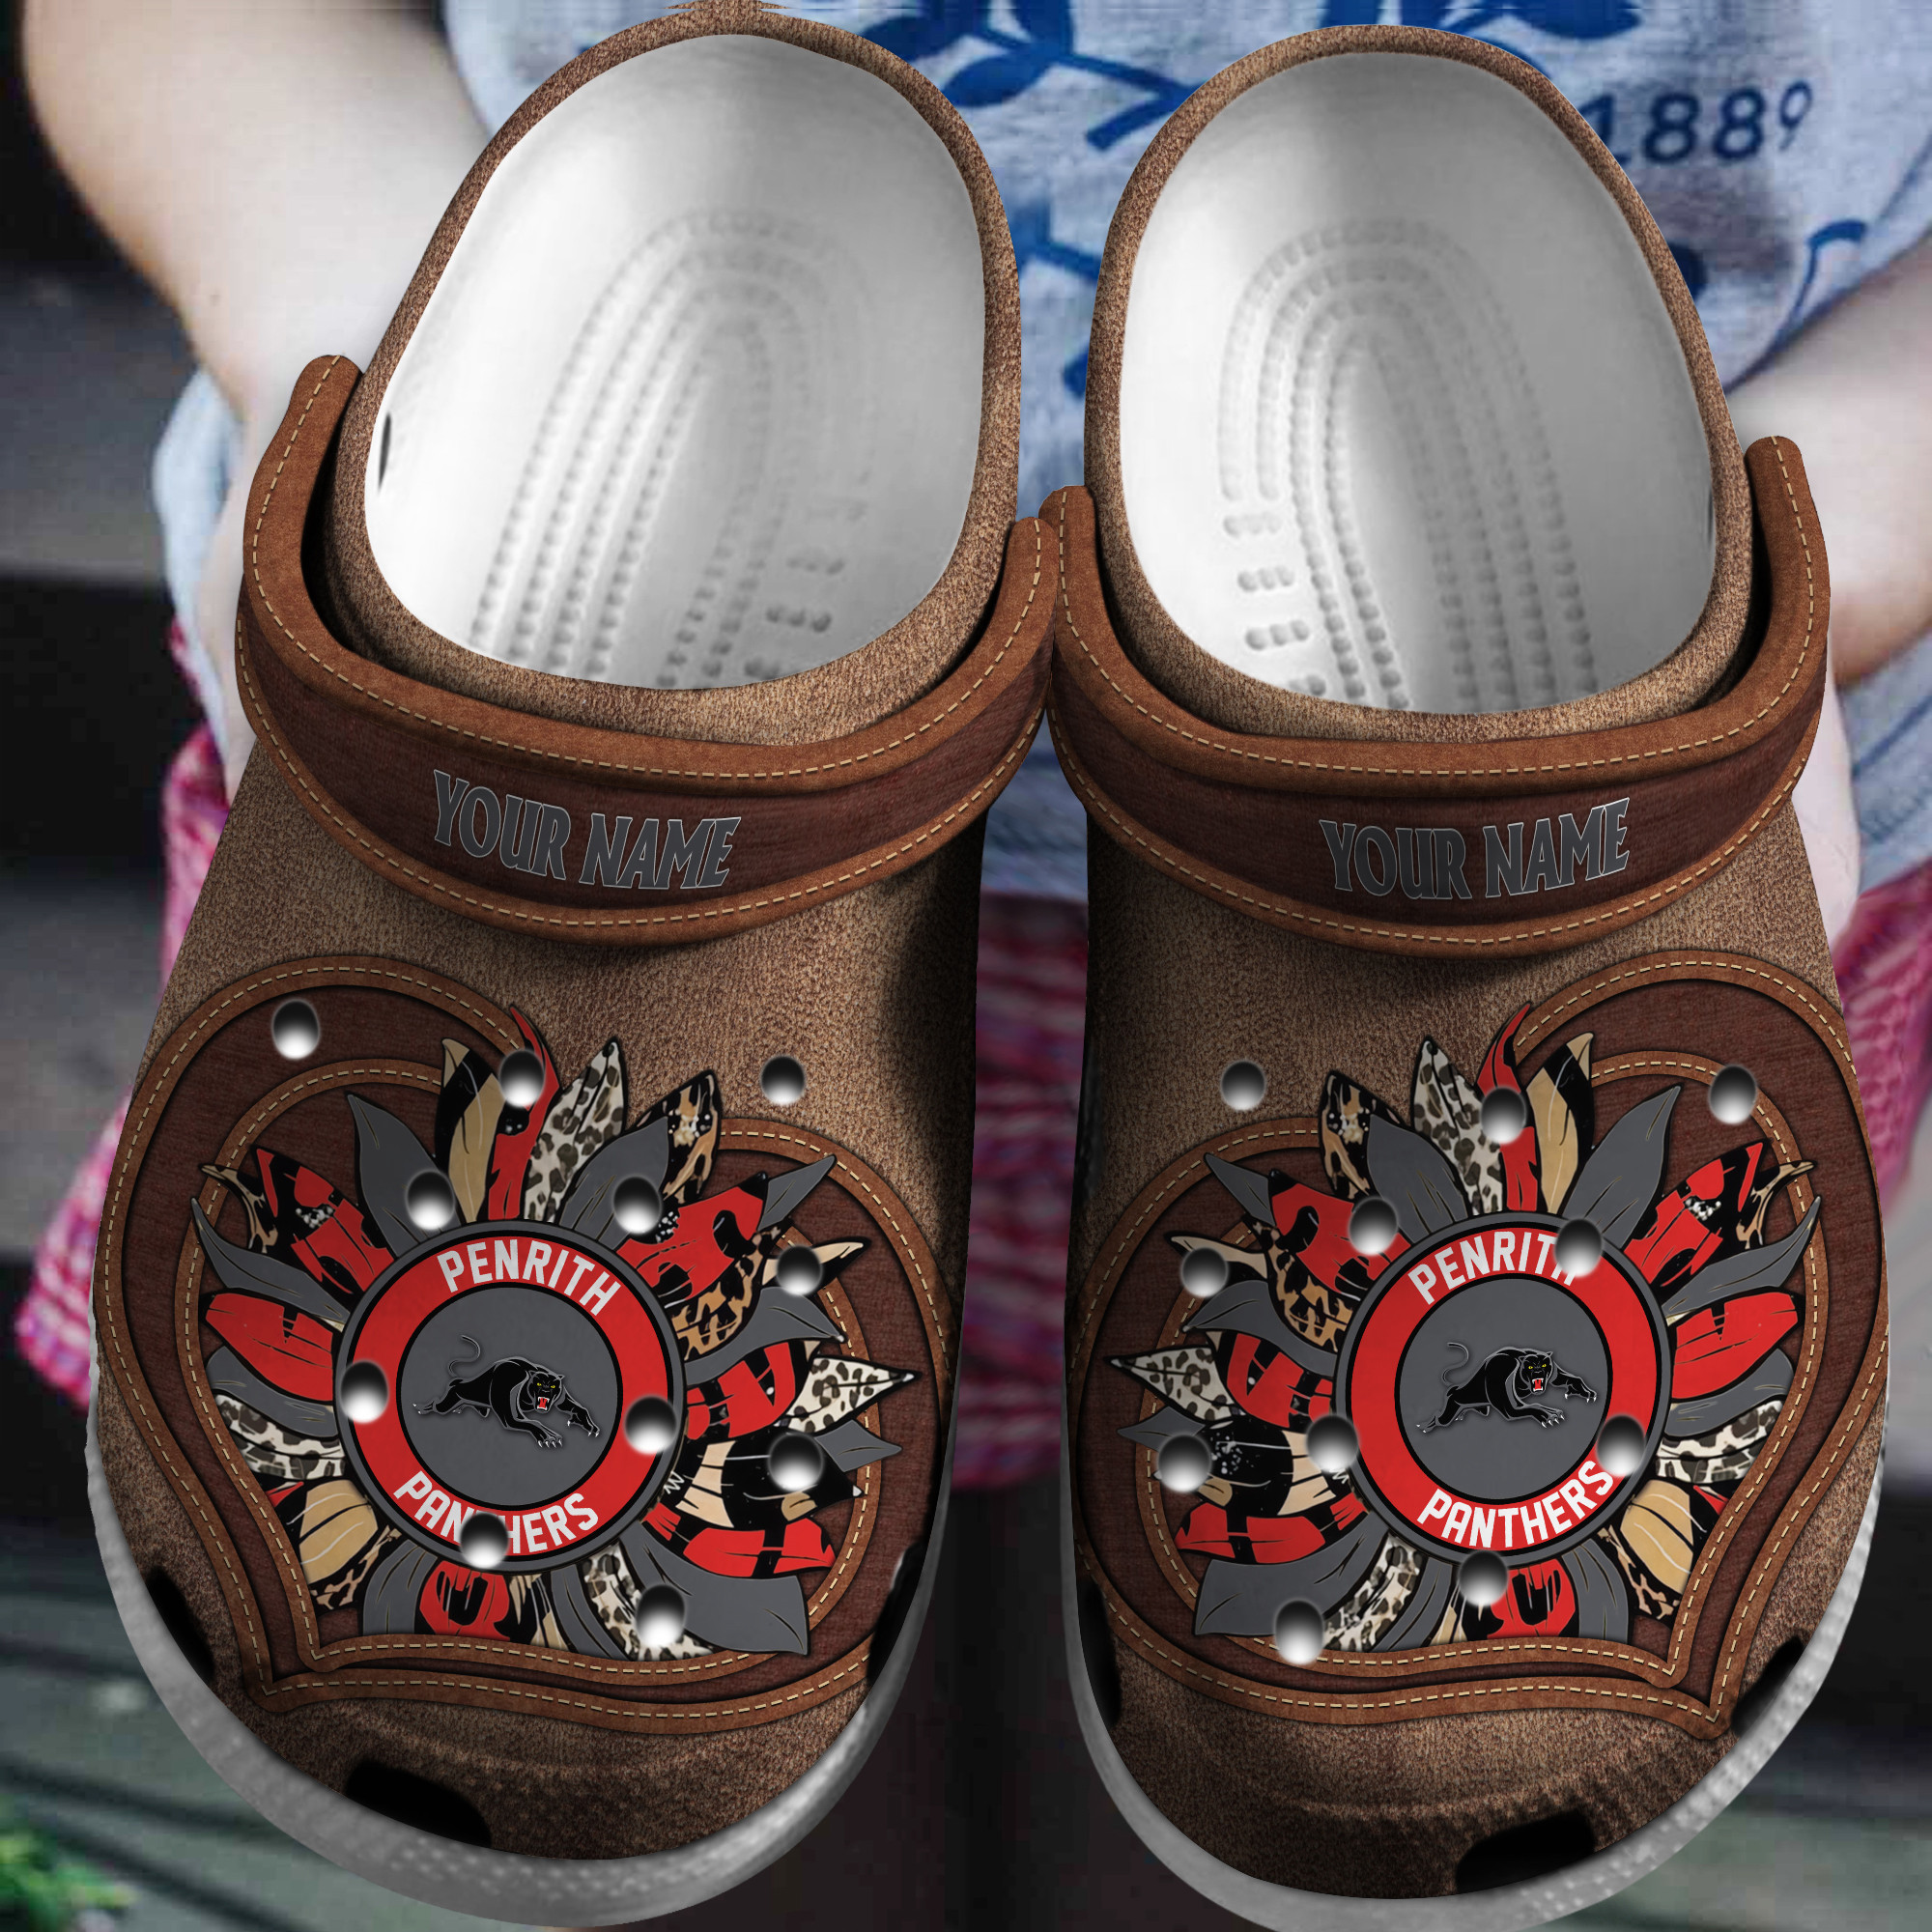 Personalized crocs for rugby fans-Limited Edition NRL070823LNQ2839 ...